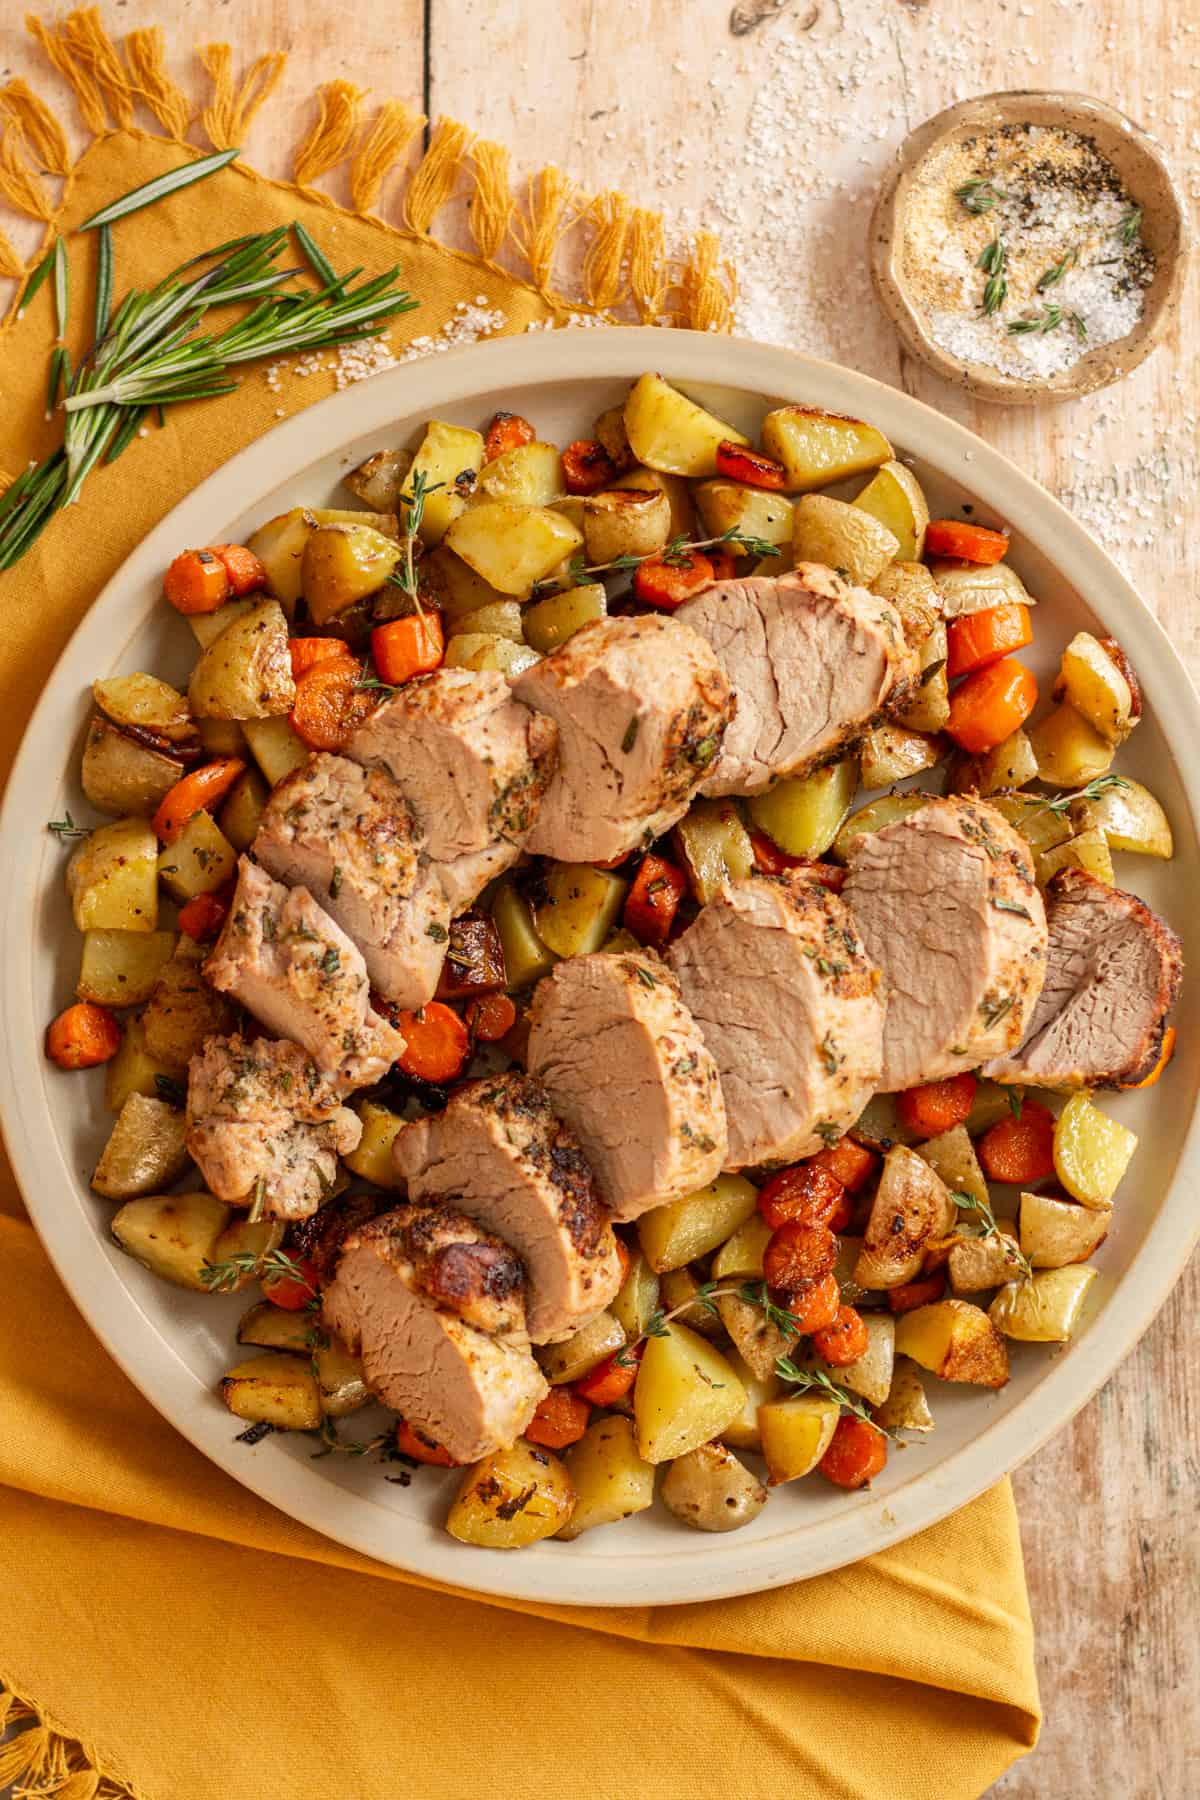 Sliced cast iron pork tenderloin on a bed of roasted carrots and potatoes, garnished with fresh thyme and rosemary.